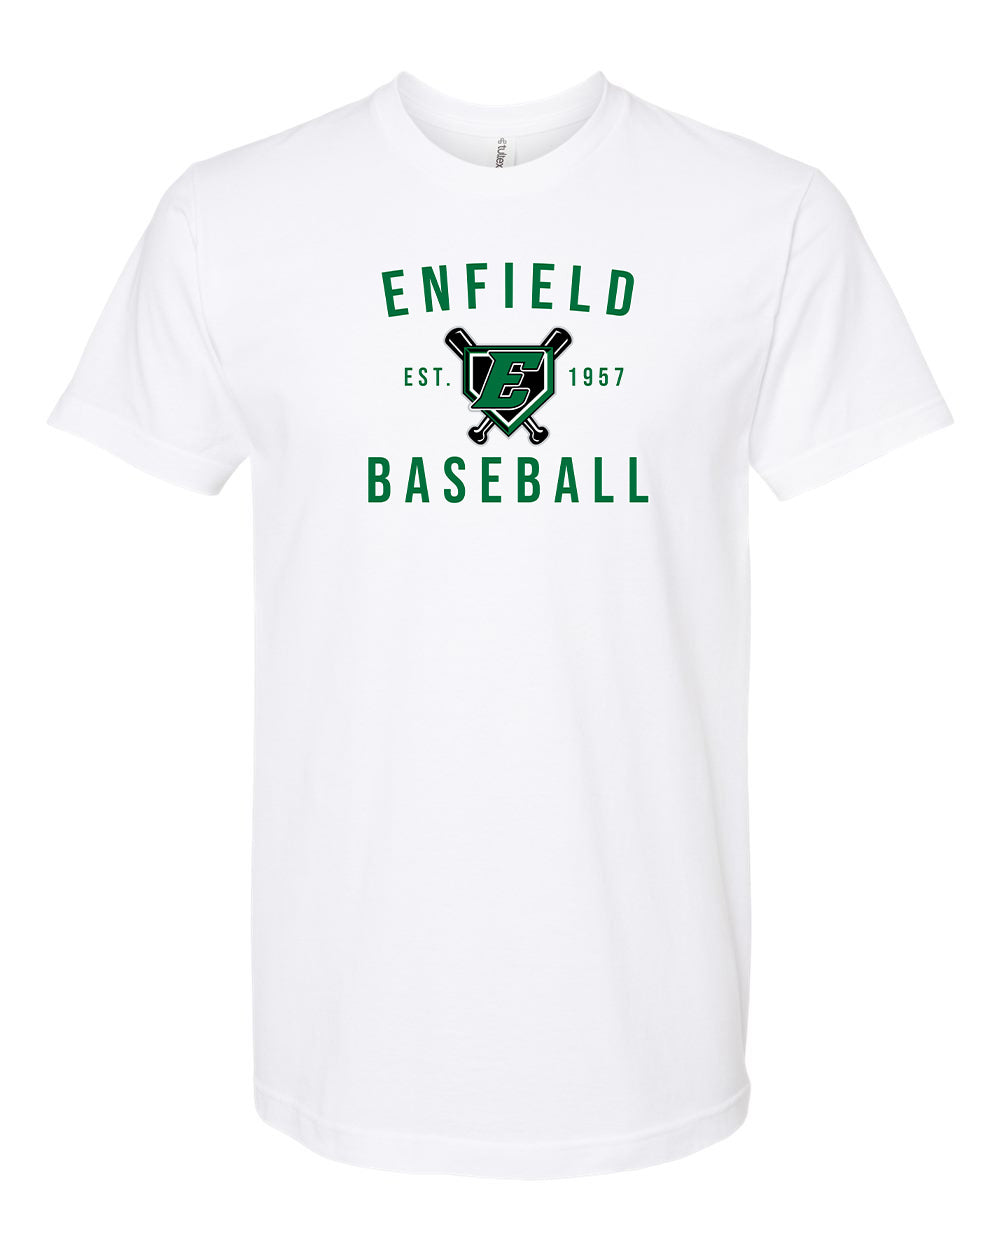 ELL Adult Jersey T-shirt "EST" - 202 (color options available)